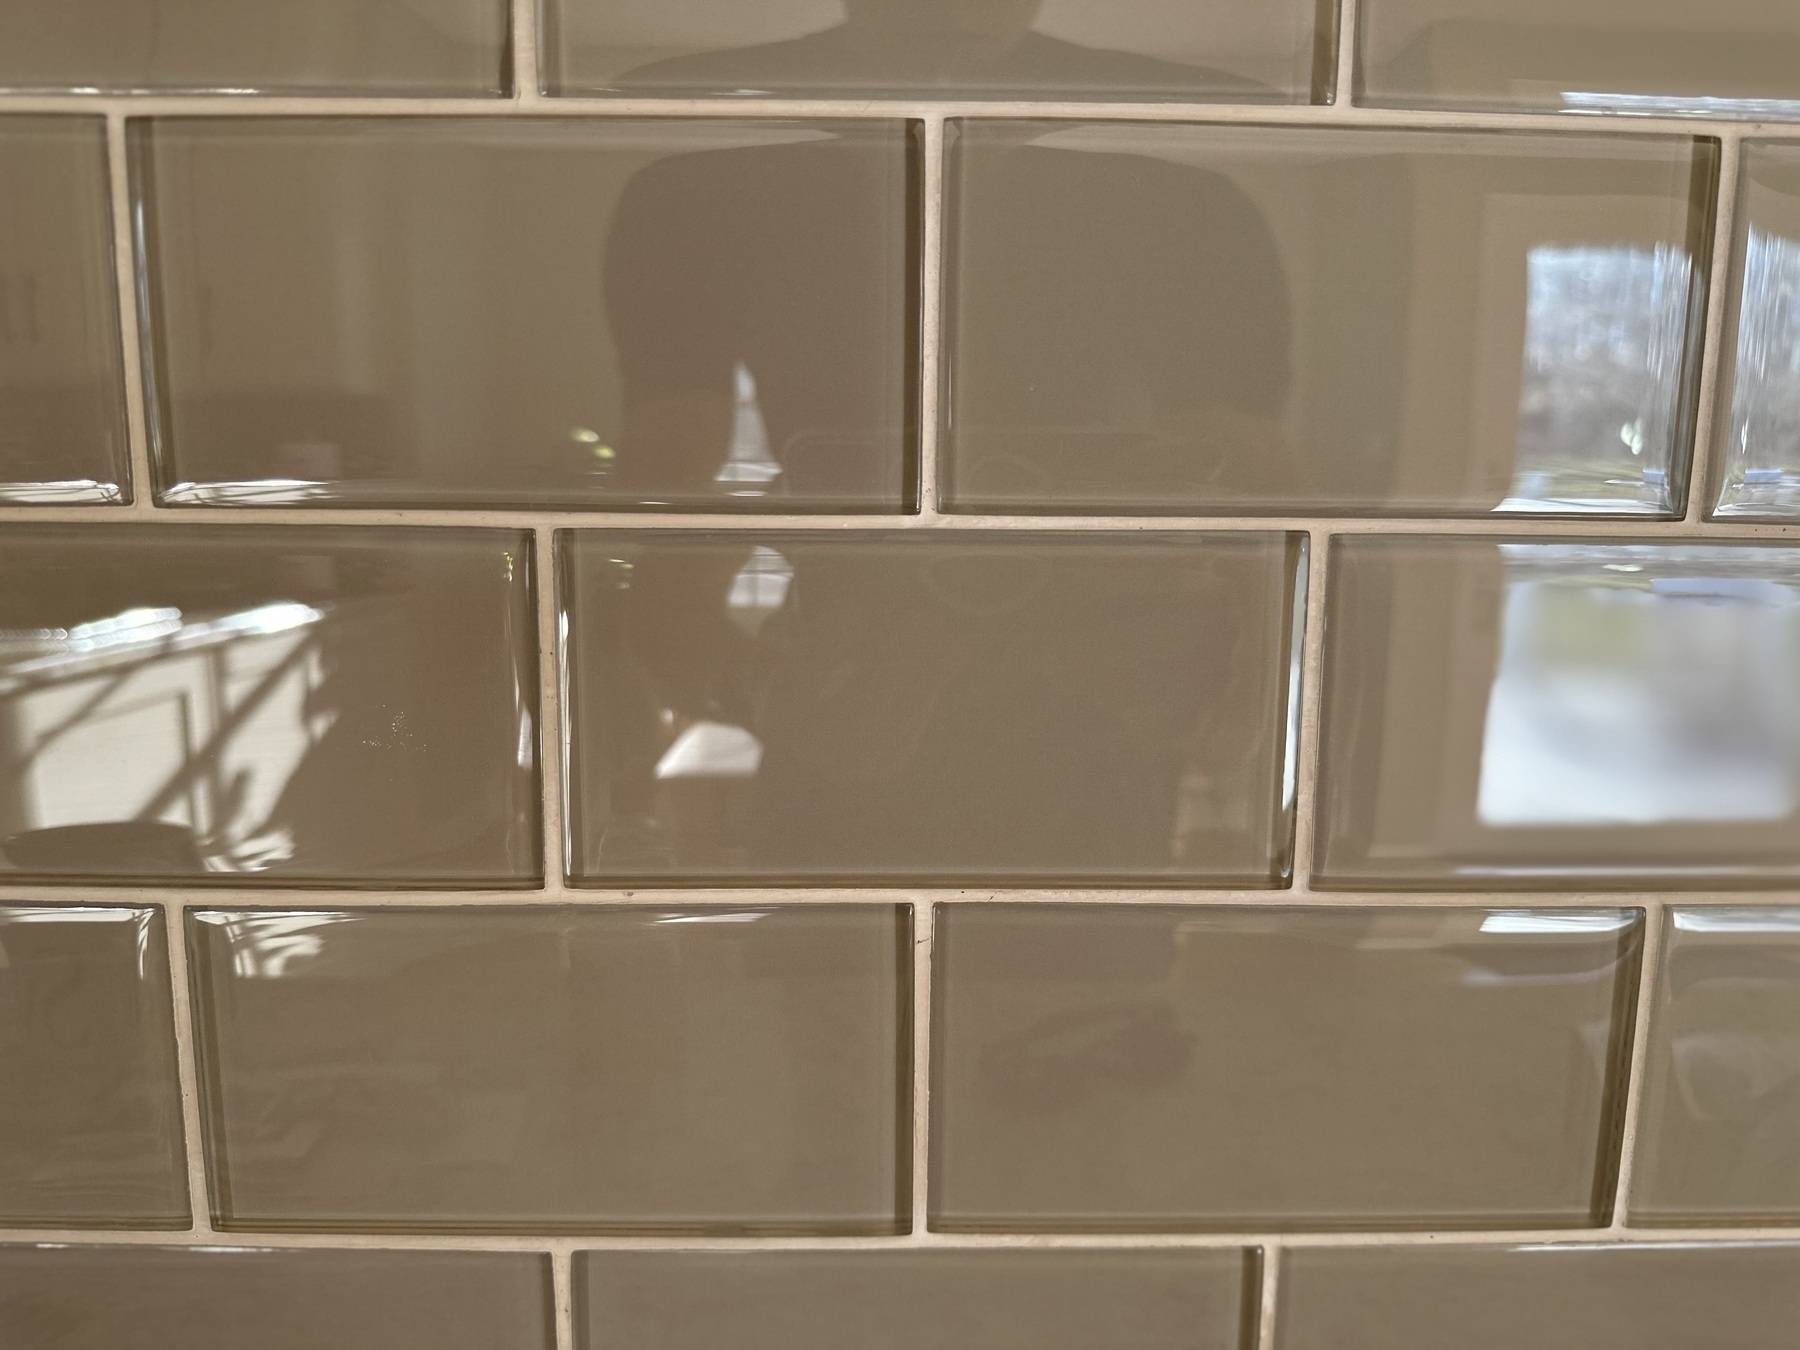 Glass subway tiles with a reflection